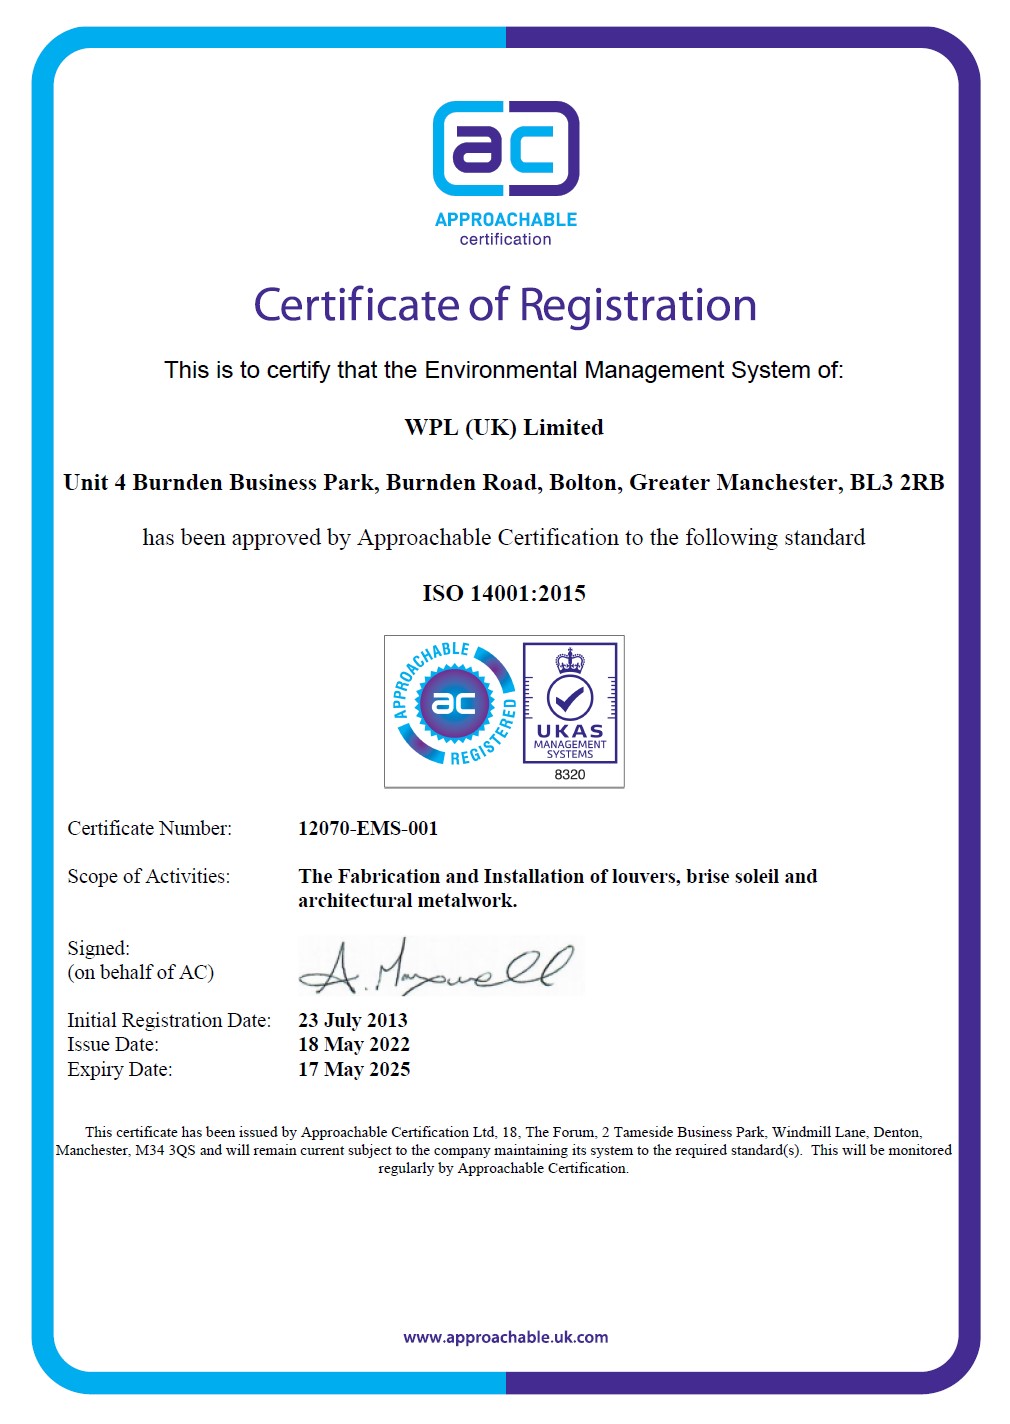 WPLUK ISO14001 2015 Certification to 17th May 2025 larger image